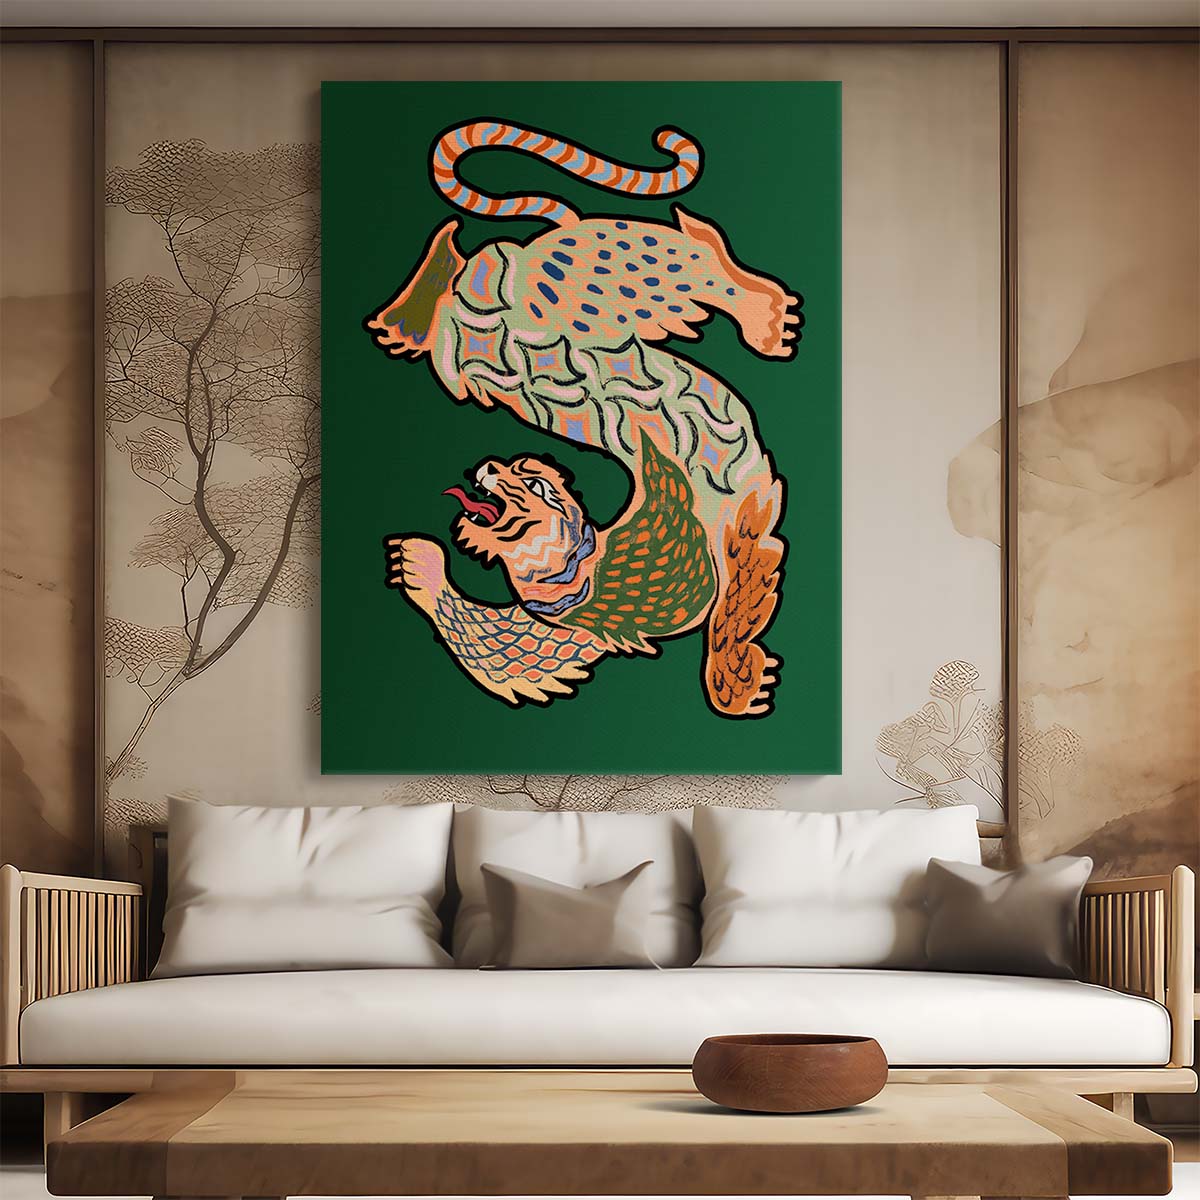 Abstract Geometric Tiger Illustration, Colorful Boho Animal Wall Art by Luxuriance Designs, made in USA